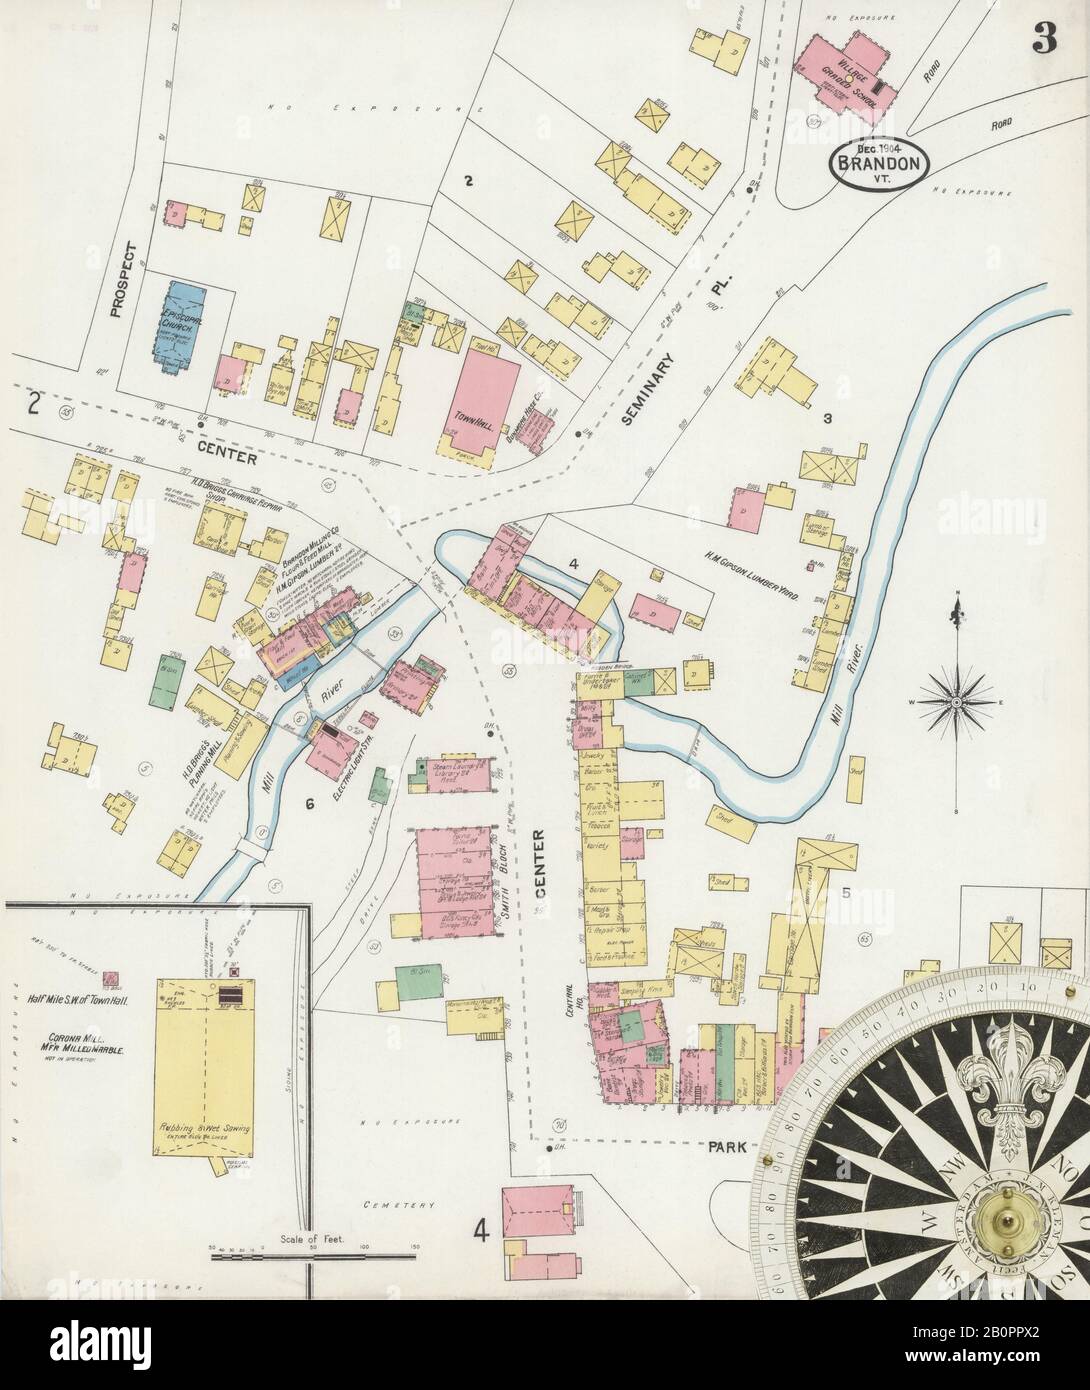 Image 3 of Sanborn Fire Insurance Map from Brandon, Rutland County, Vermont. Dec 1904. 5 Sheet(s), America, street map with a Nineteenth Century compass Stock Photo